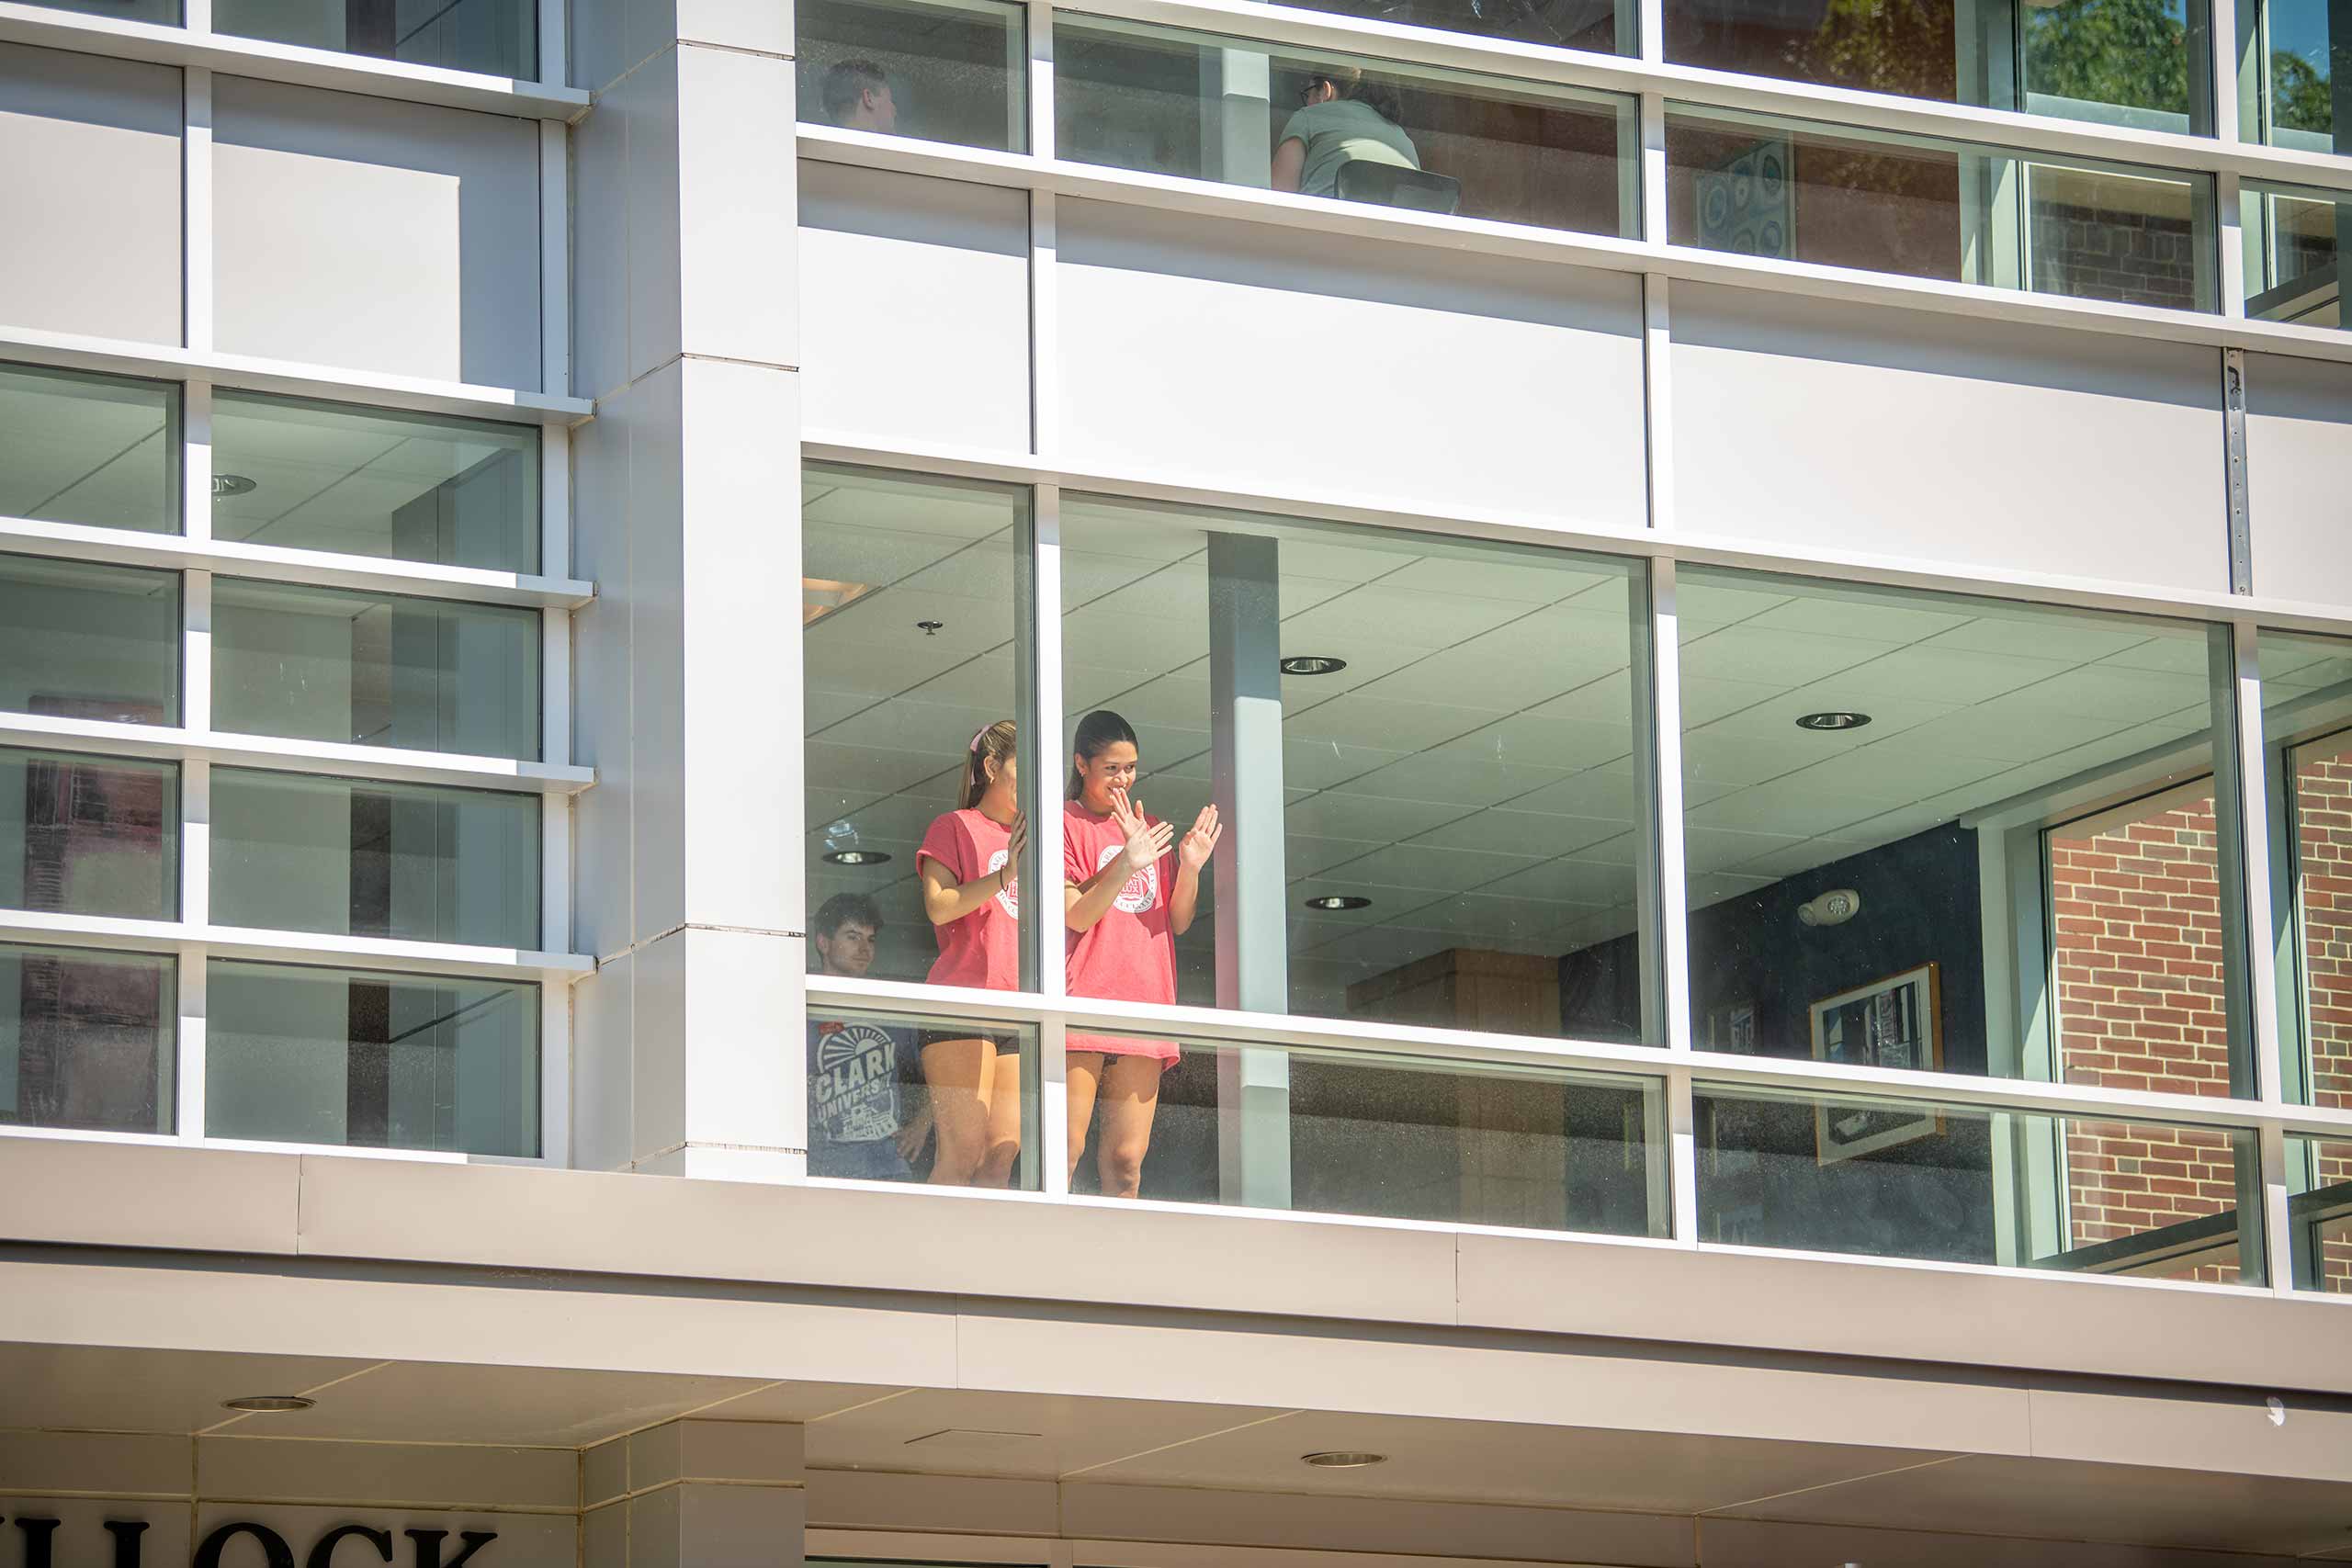 Students looking out towards campus from inside a glass walled building